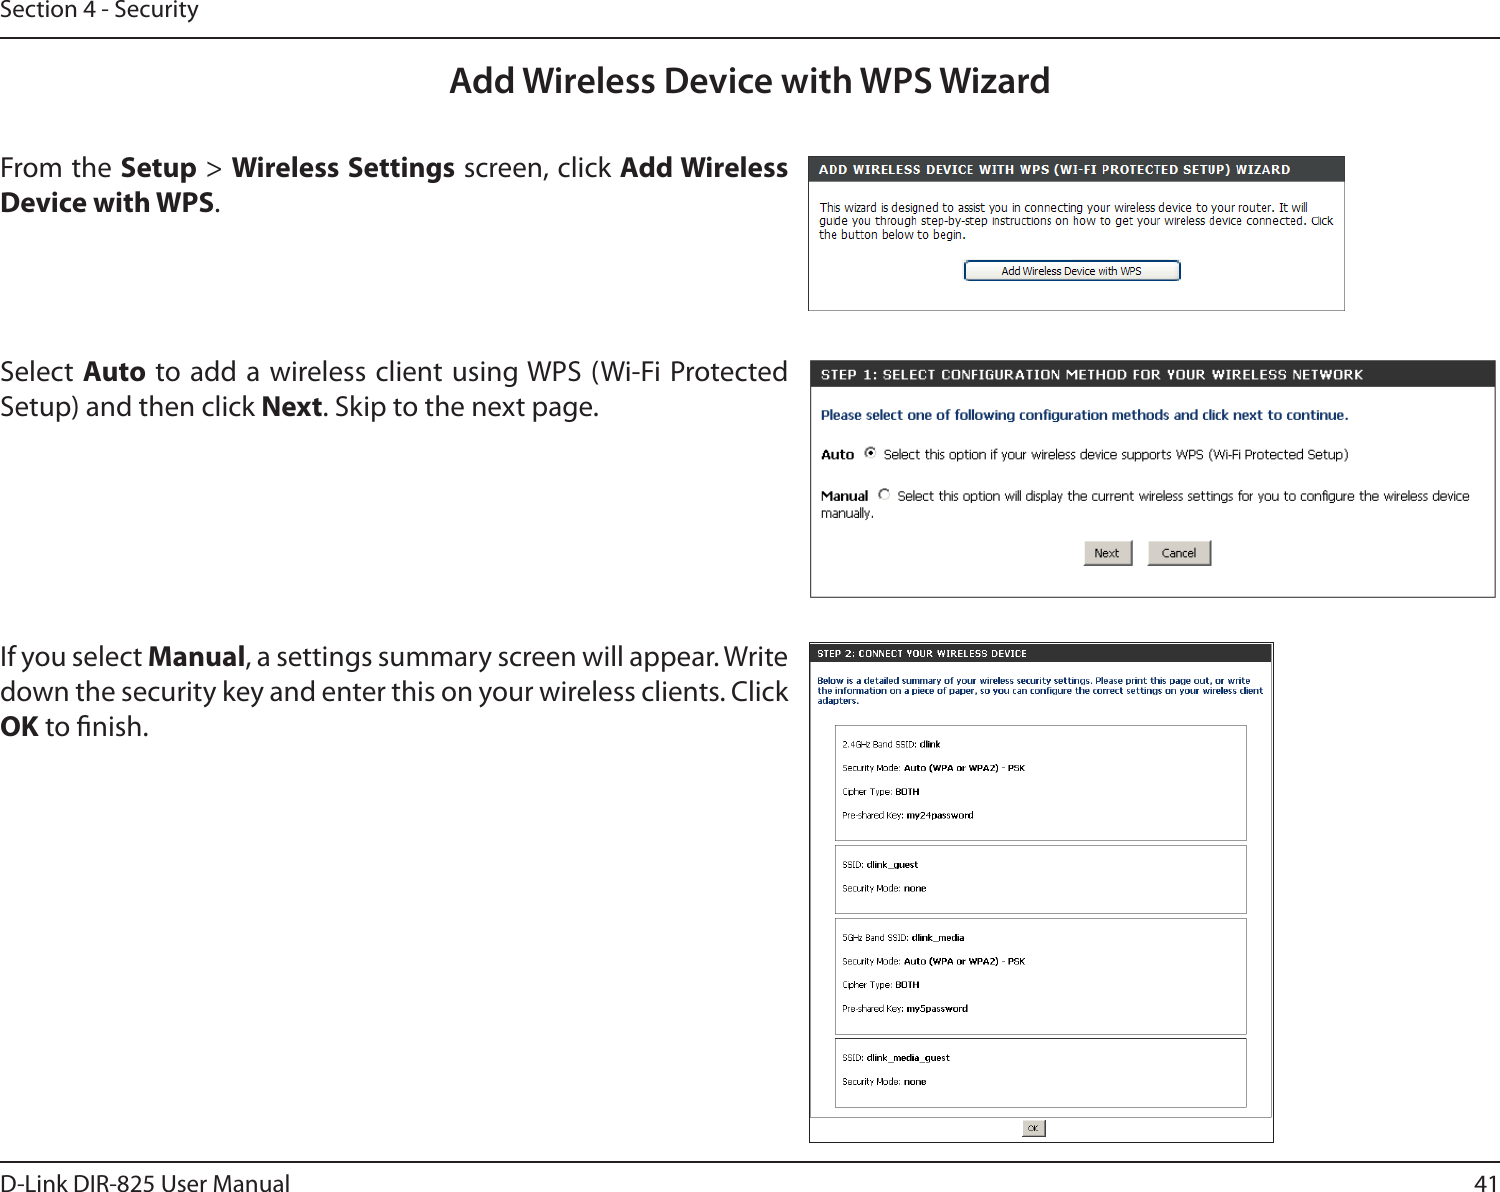 41D-Link DIR-825 User ManualSection 4 - SecurityFrom the Setup &gt; Wireless Settings screen, click Add Wireless Device with WPS.Add Wireless Device with WPS WizardIf you select Manual, a settings summary screen will appear. Write down the security key and enter this on your wireless clients. Click OK to nish.Select Auto to add a  wireless client using WPS (Wi-Fi Protected Setup) and then click Next. Skip to the next page. 